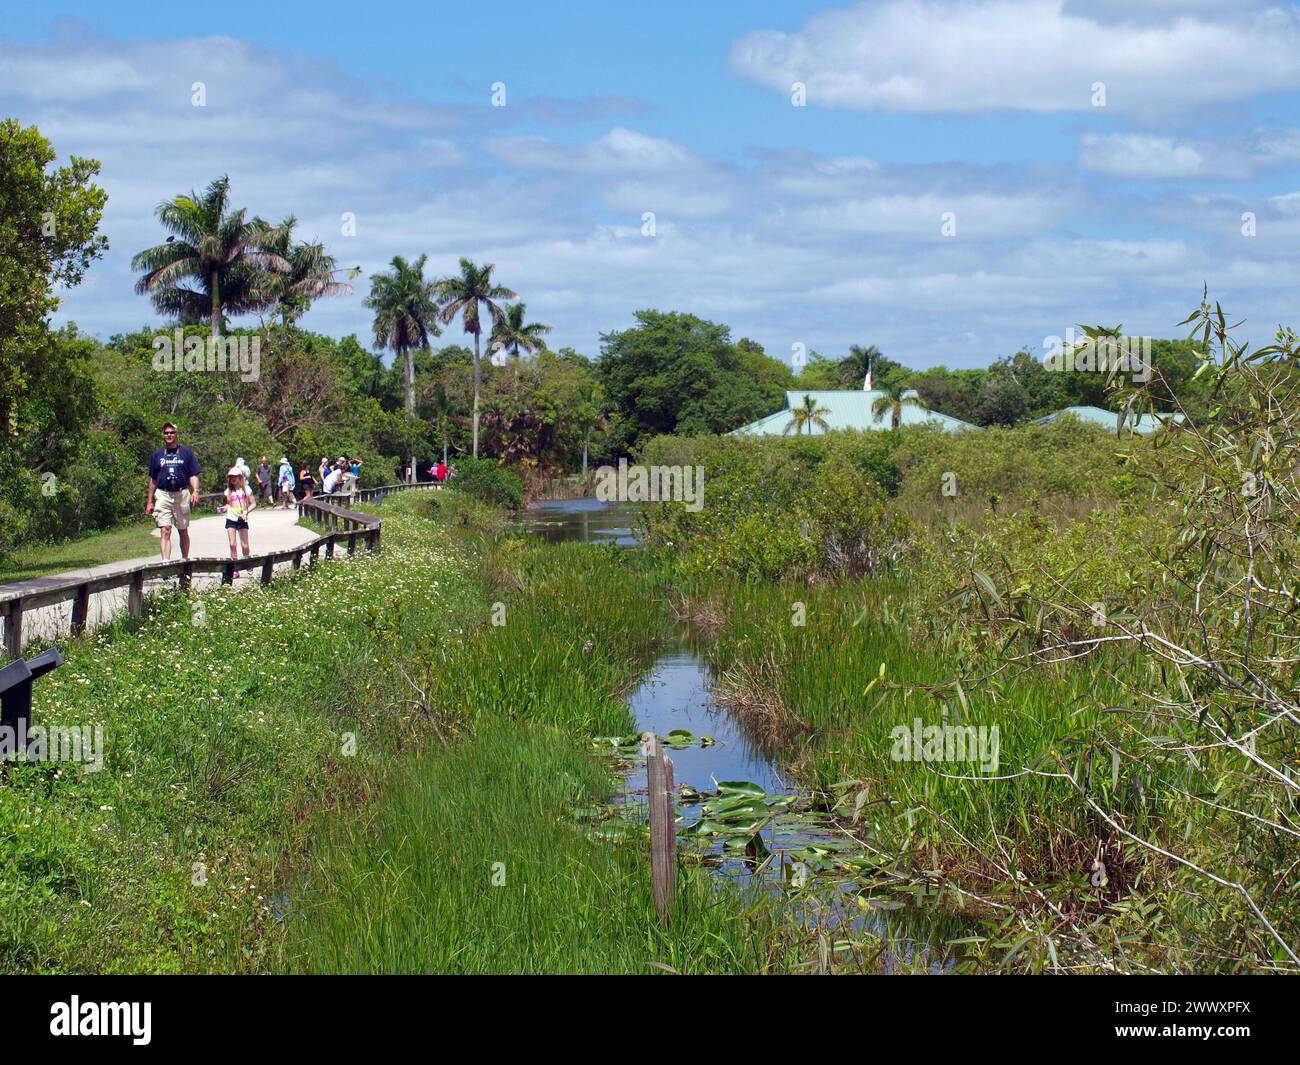 Everglades National Park, Florida, United States - May 4, 2013: Visitors in the Anhinga Trail in the Royal Palm Visitor Center. Stock Photo